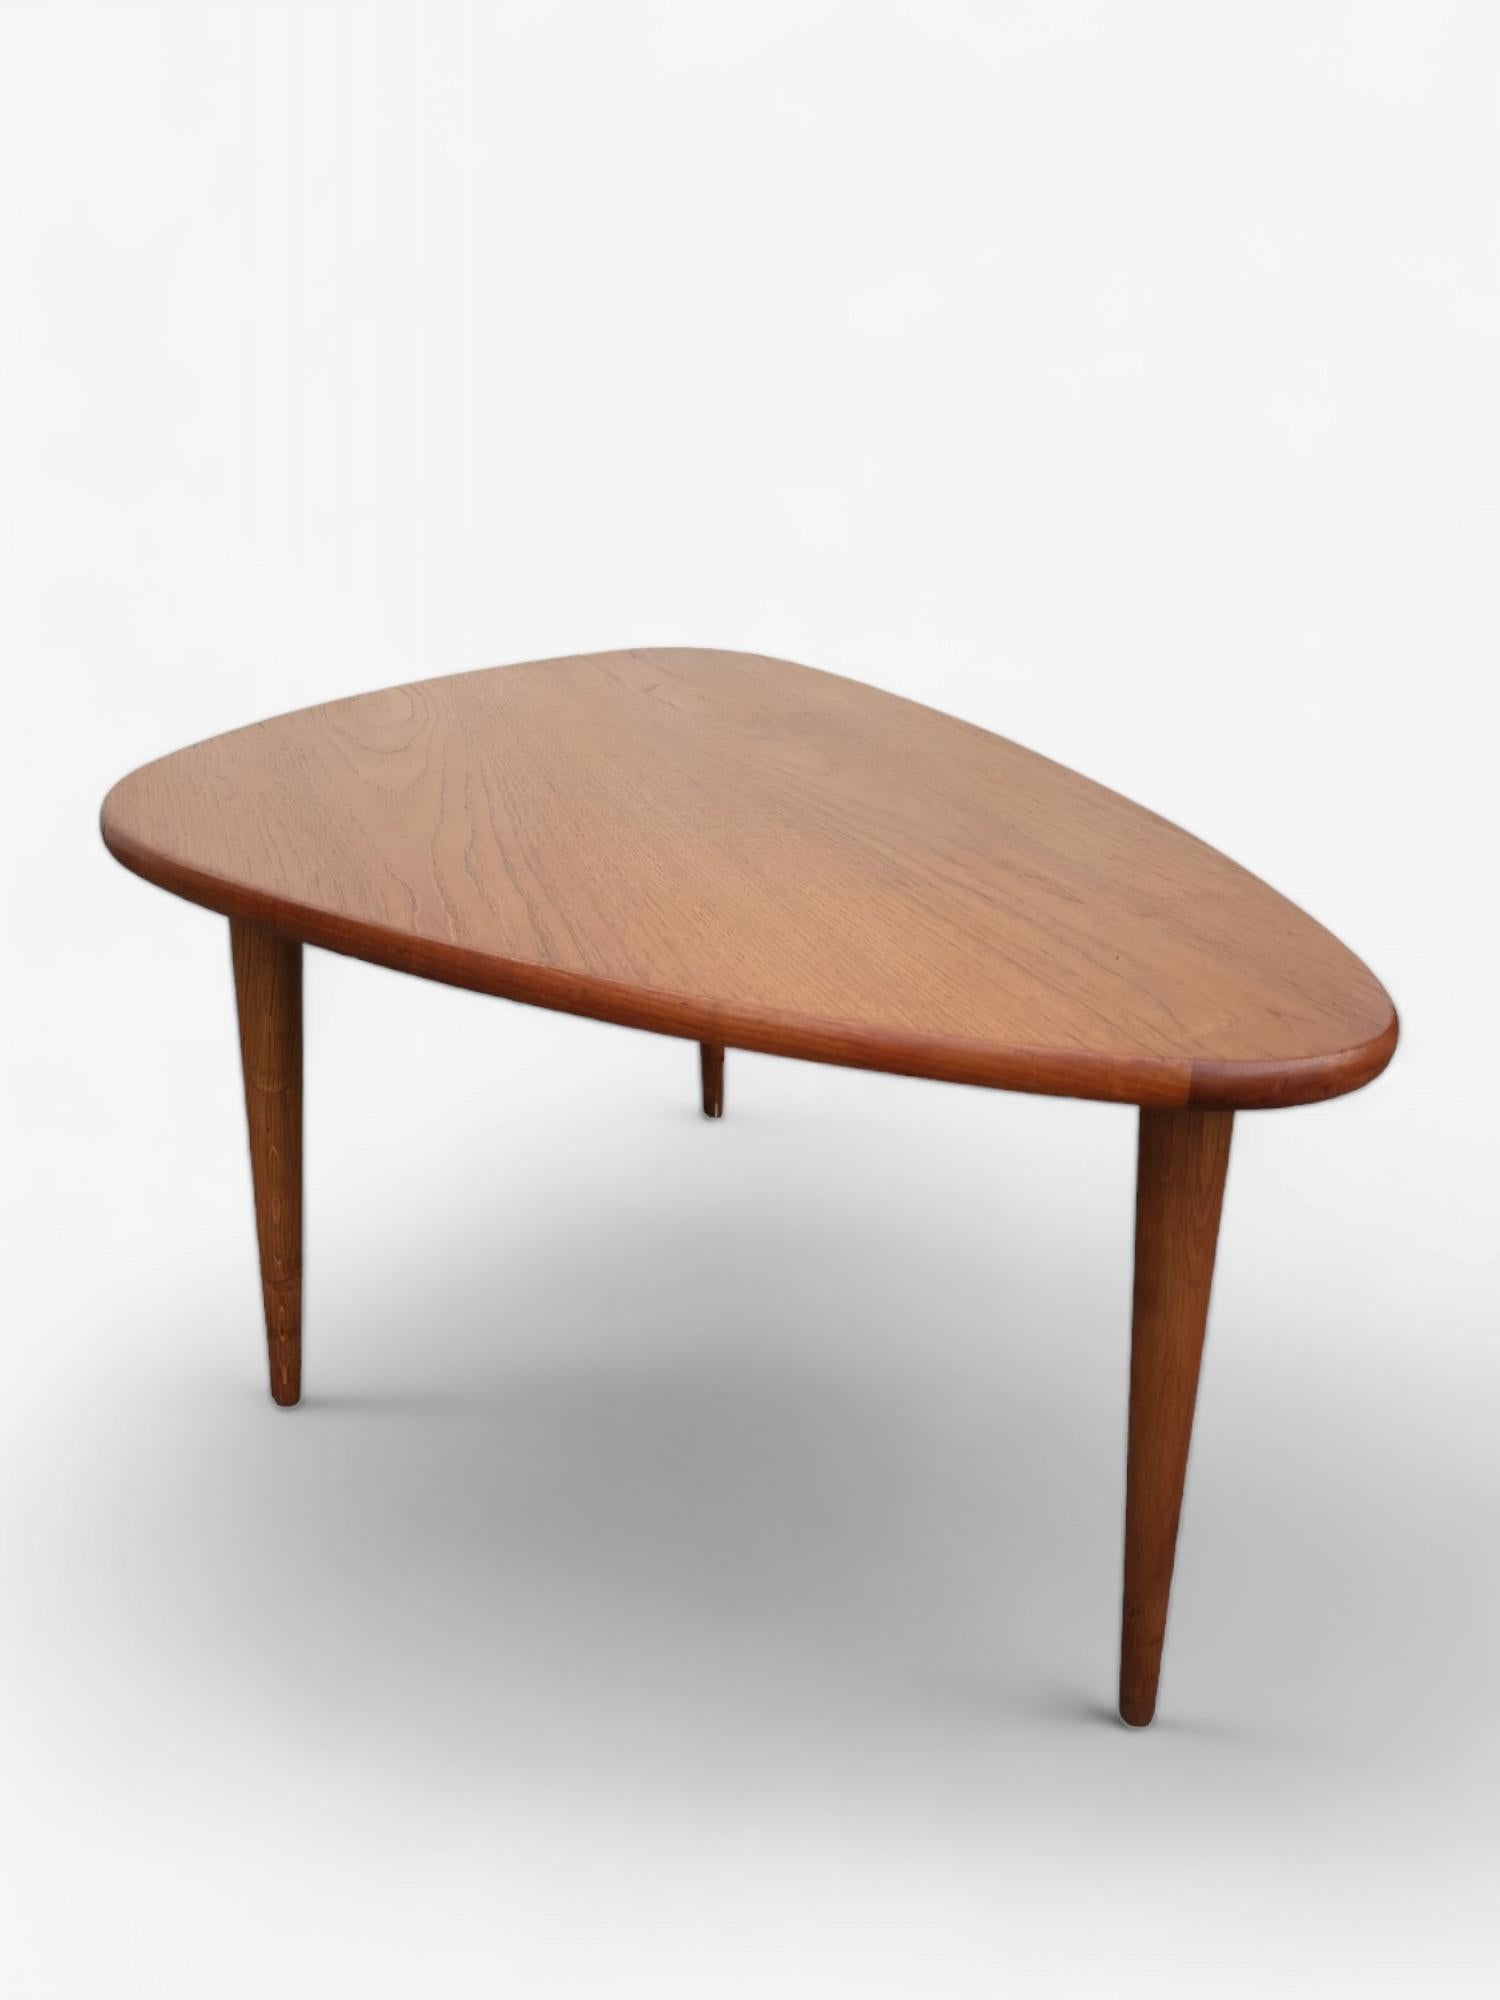 kidney shaped table